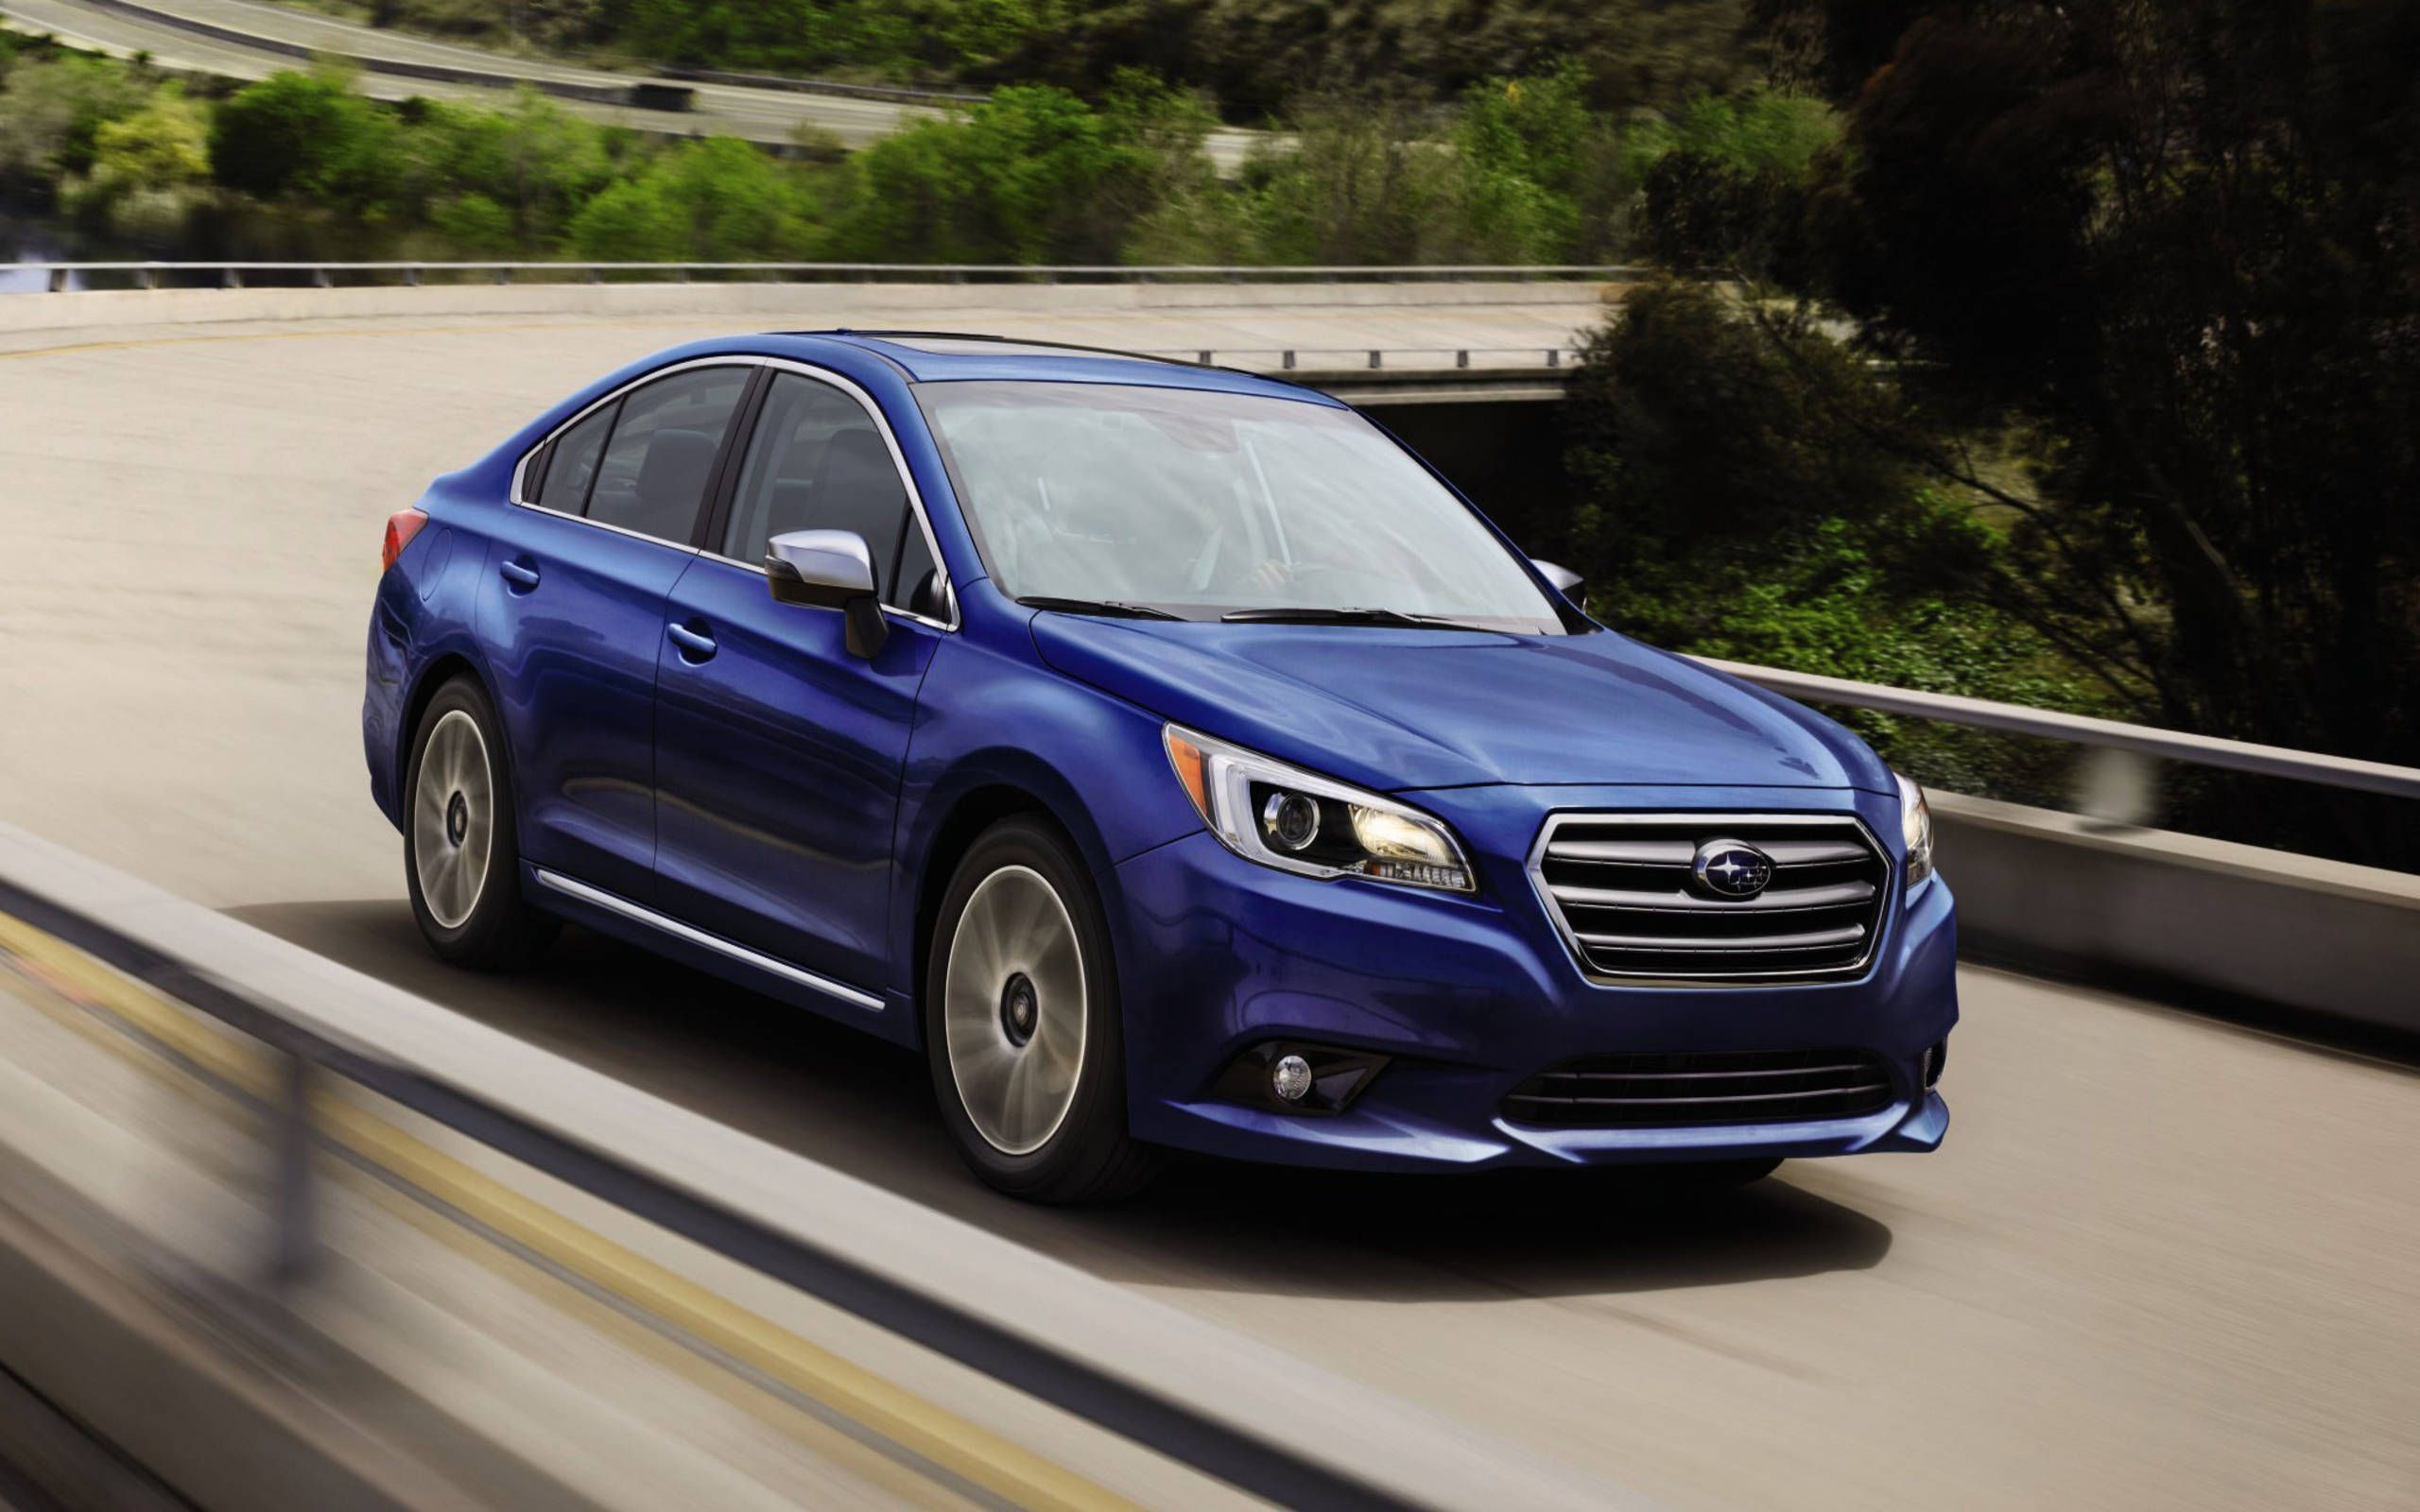 2017 Subaru Legacy and Outback pricing: Here's what to expect